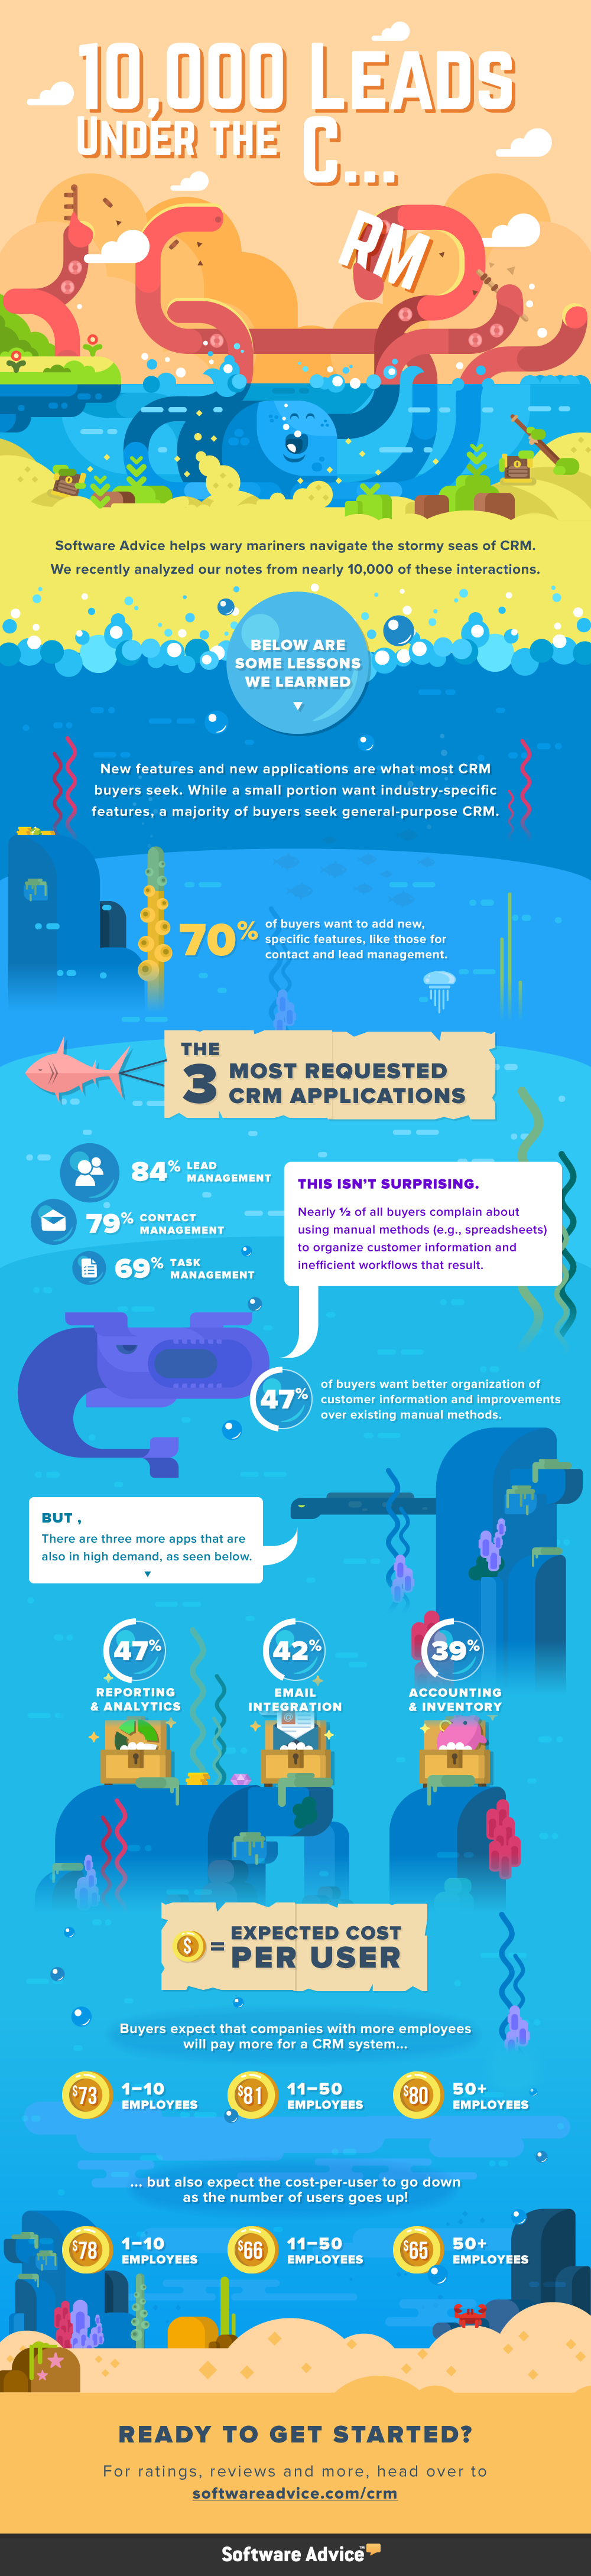 crm-leads-infographic